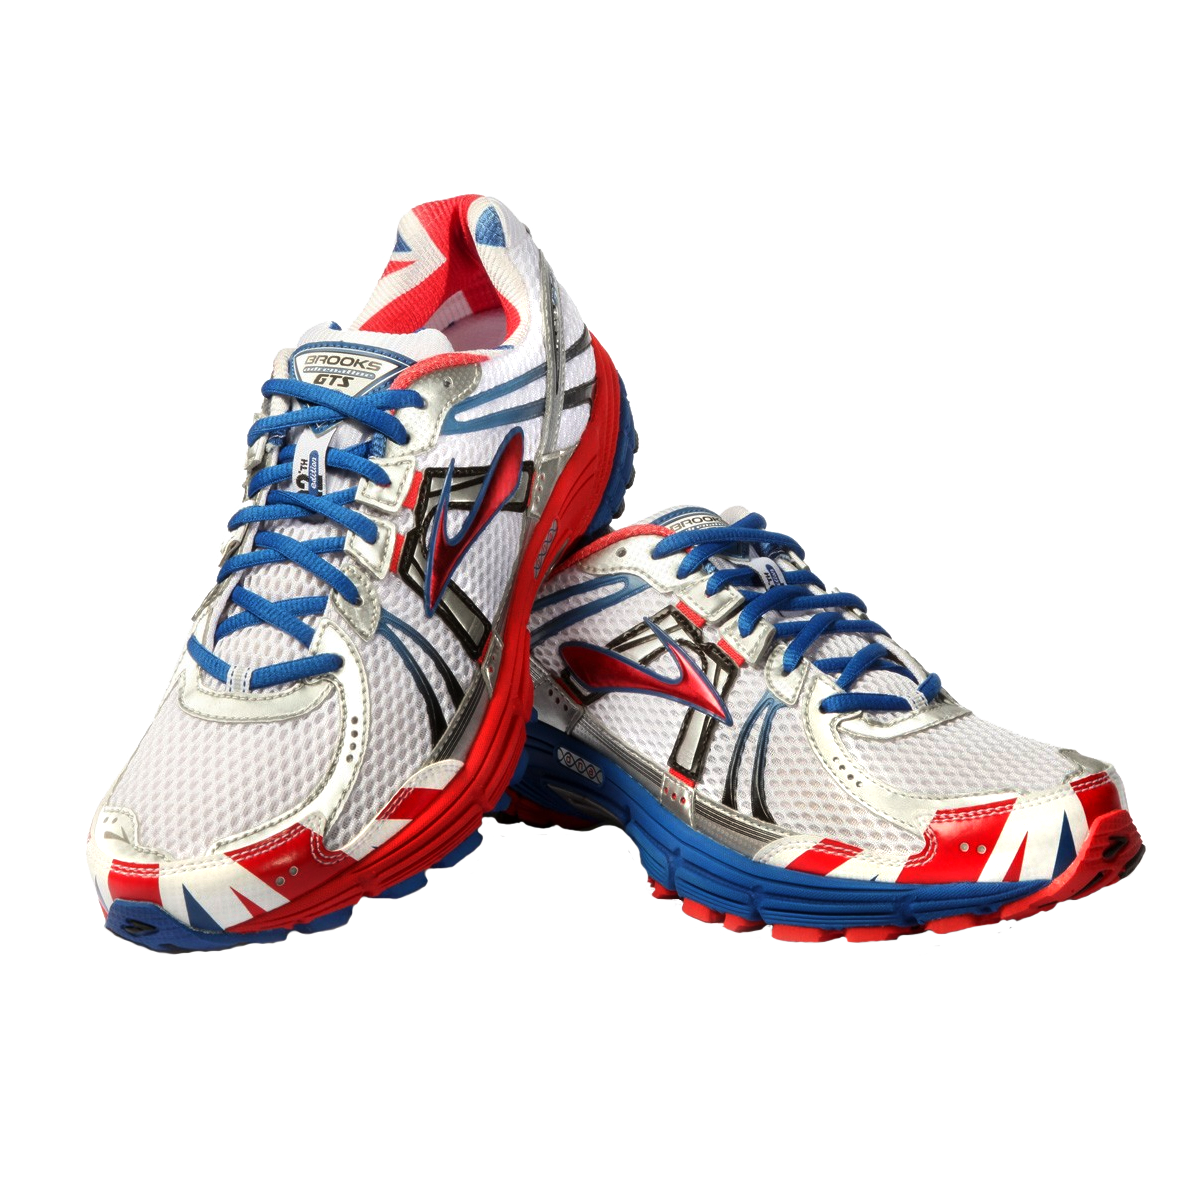 Running Shoes PNG - 1945